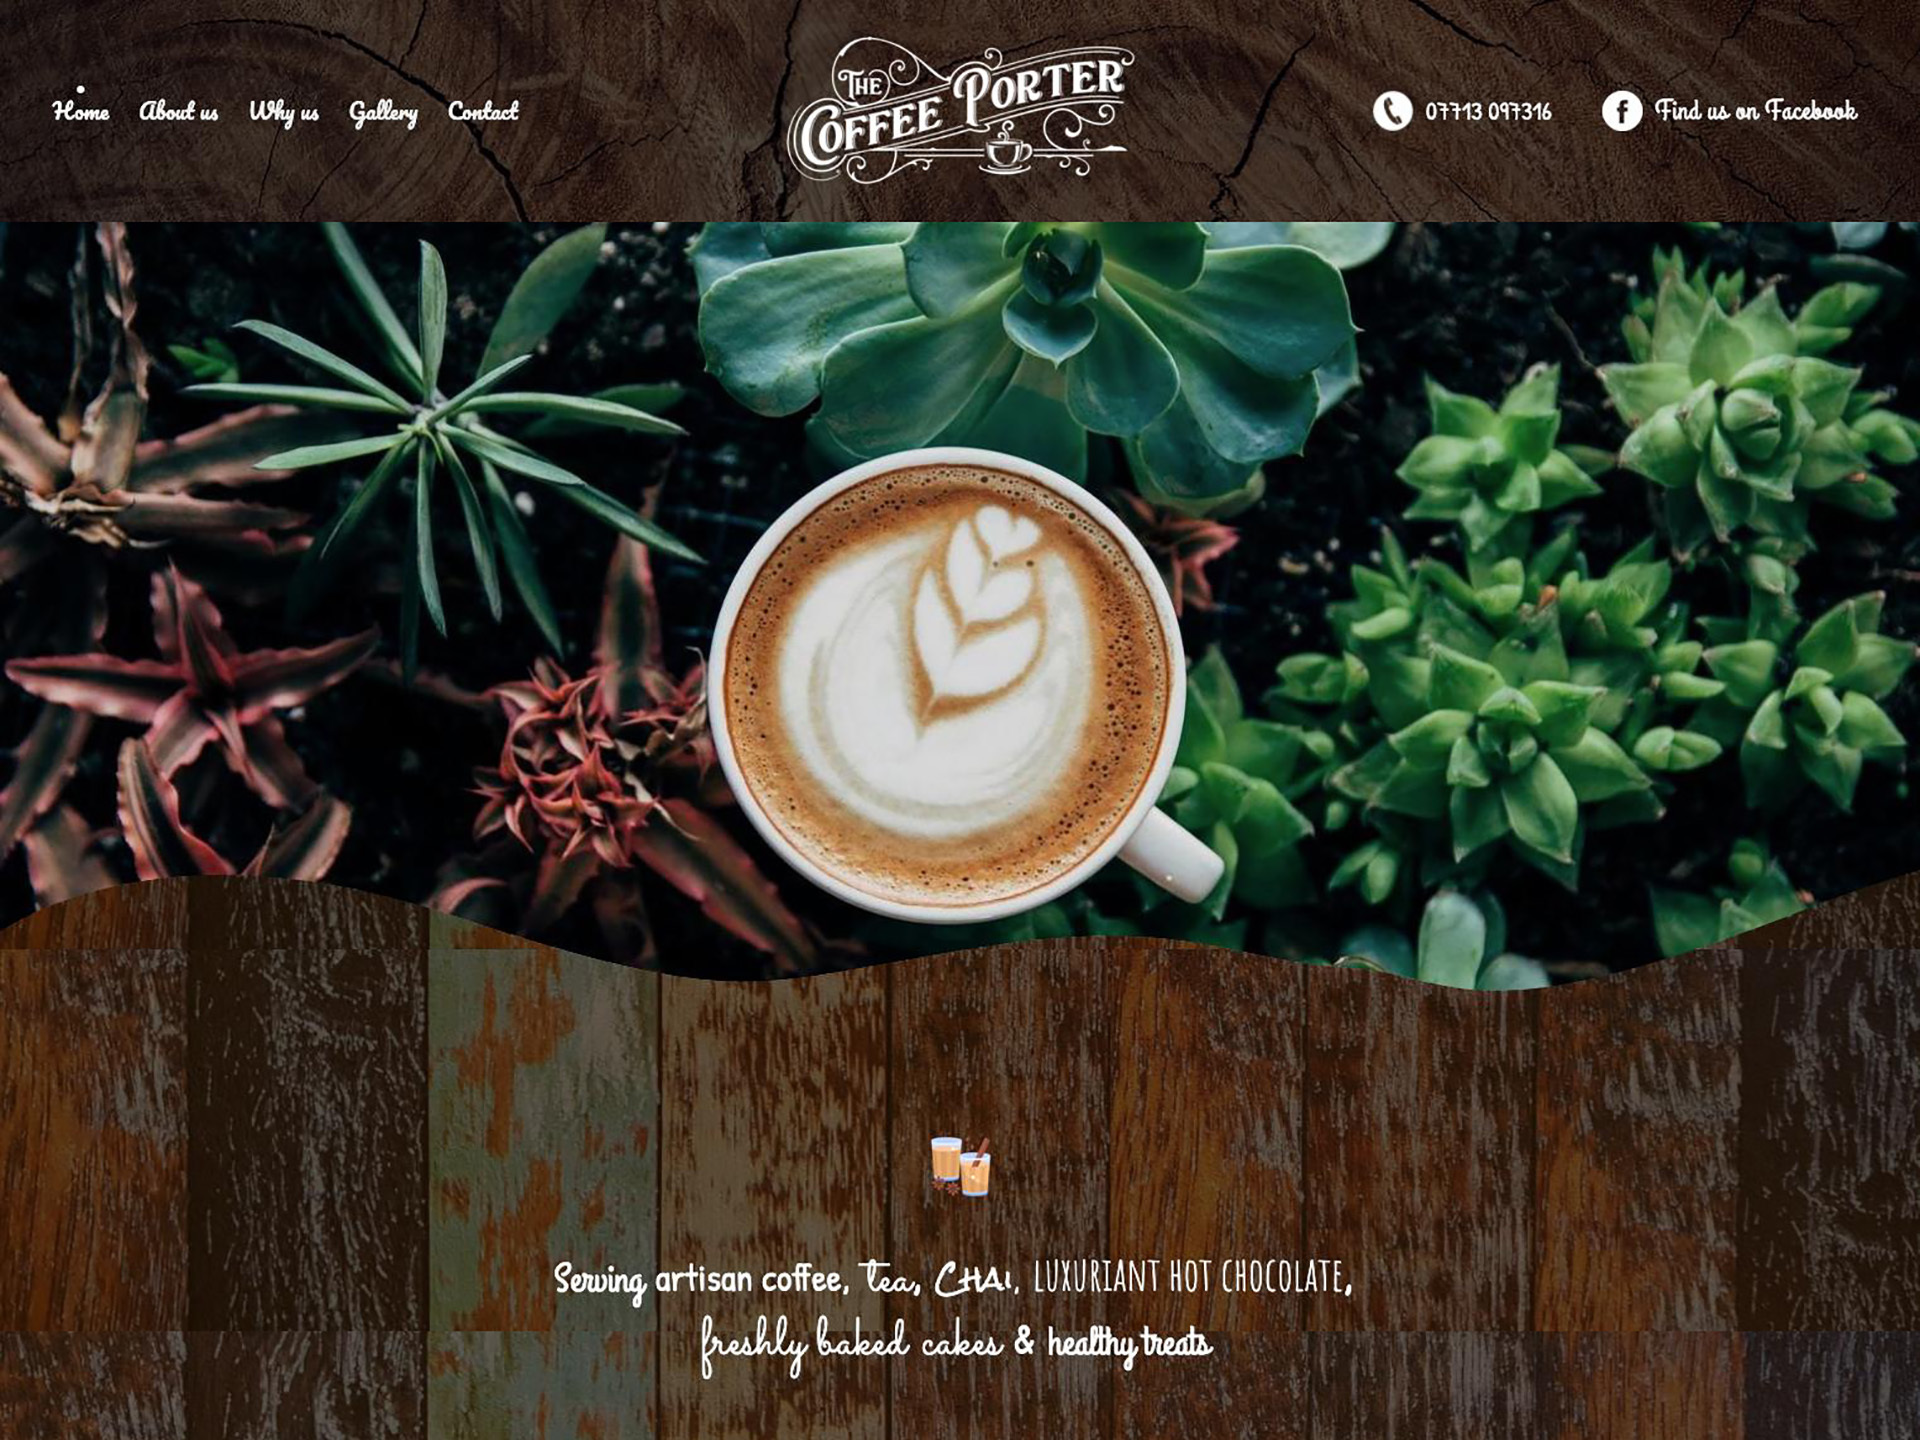 A website design for a coffee company shown on a desktop screen size